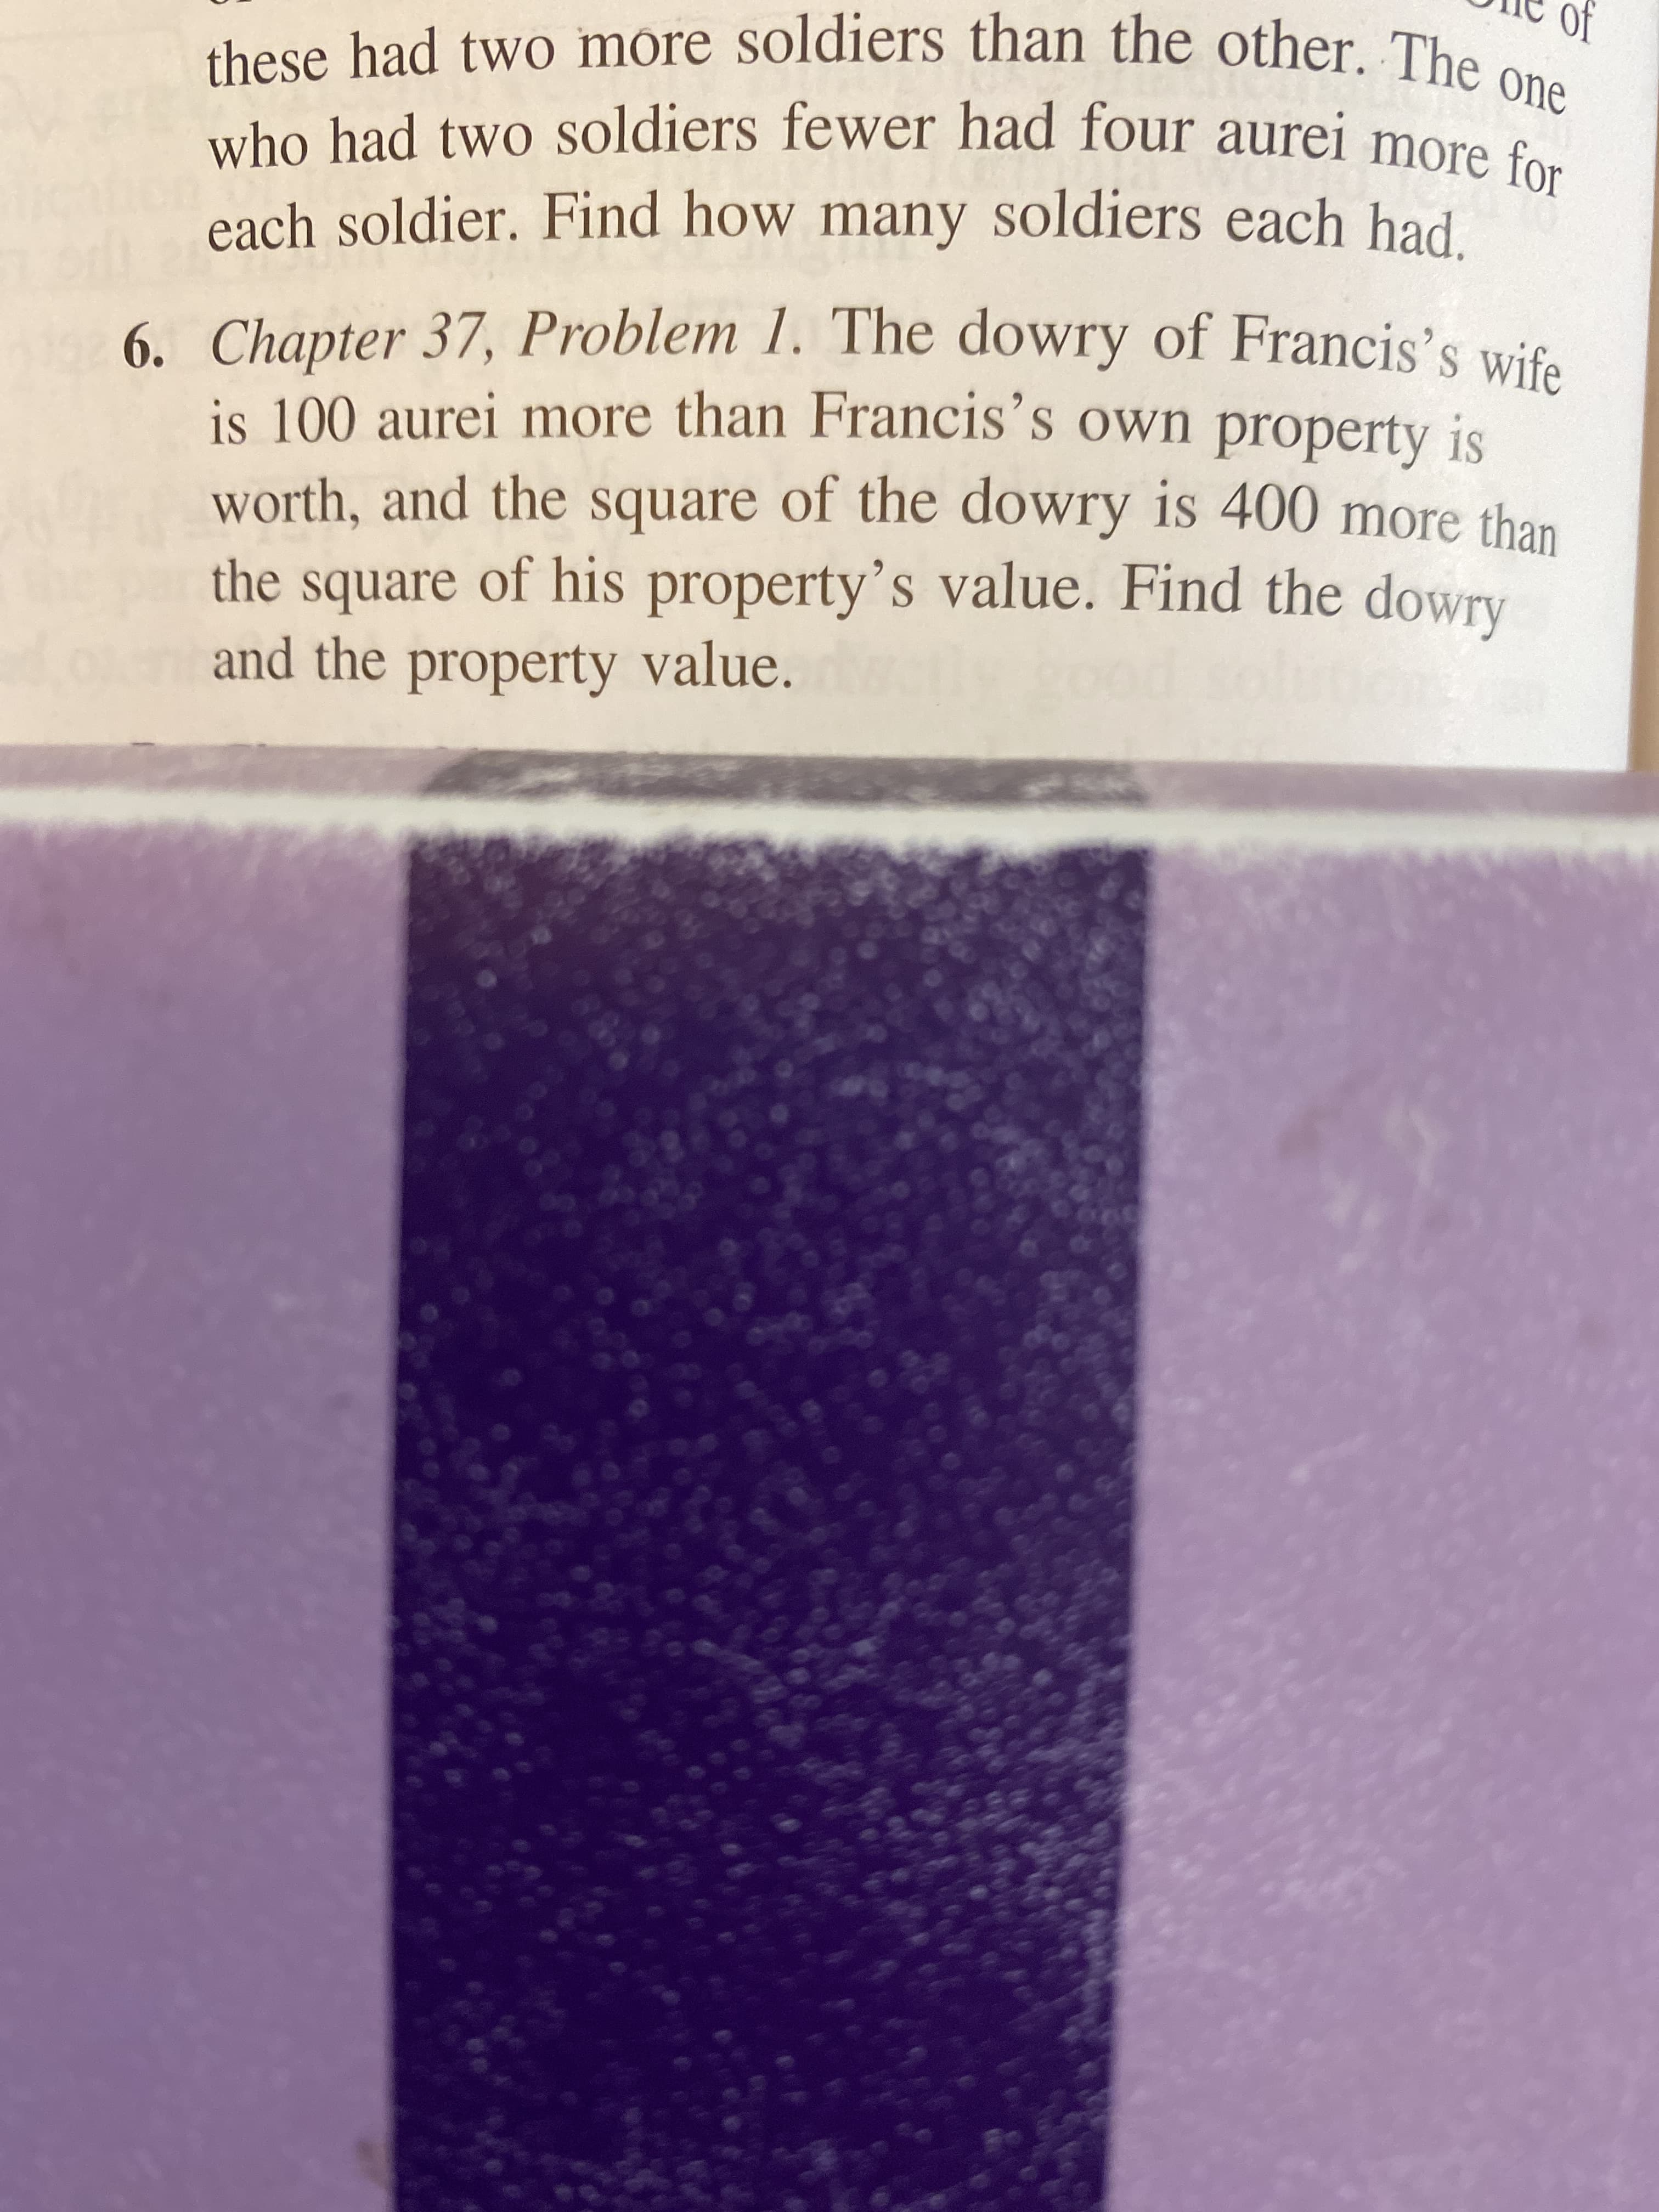 The dowry of Francis's wife
6. Chapter 37, Problem
is 100 aurei more than Francis's own property is
worth, and the square of the dowry is 400 more than
the square of his property's value. Find the dowry
and the property value.
